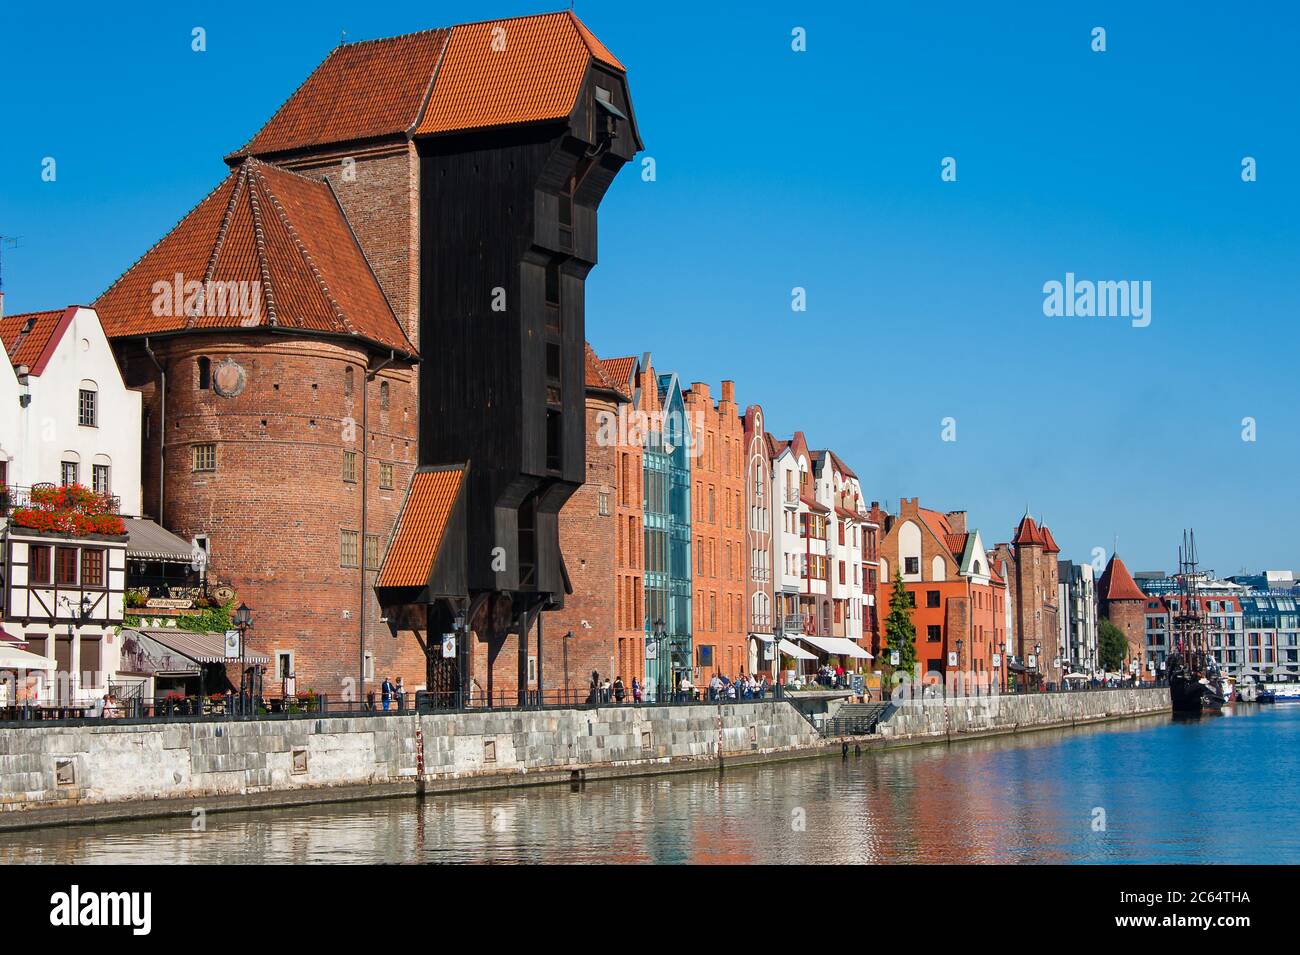 Gdansk, Poland - September 2015: Sunny views along the waterfront of Gdansk with the Zuraw (Giant Crane) against clear blue sky Stock Photo